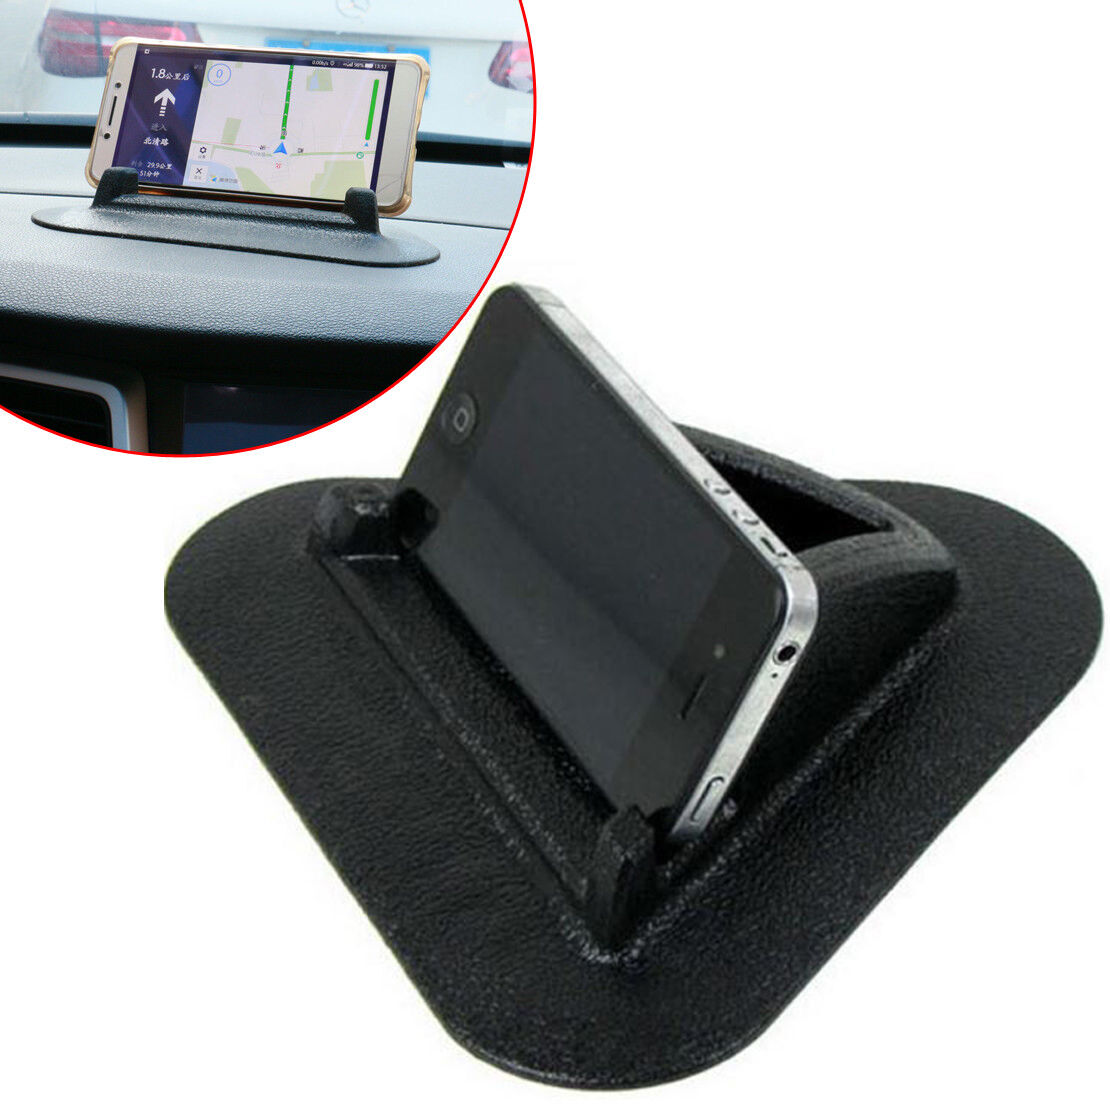 GPS Navigation Stand PC PDA iPad Tablet Support Holder Anti Slip Mounts Silicone